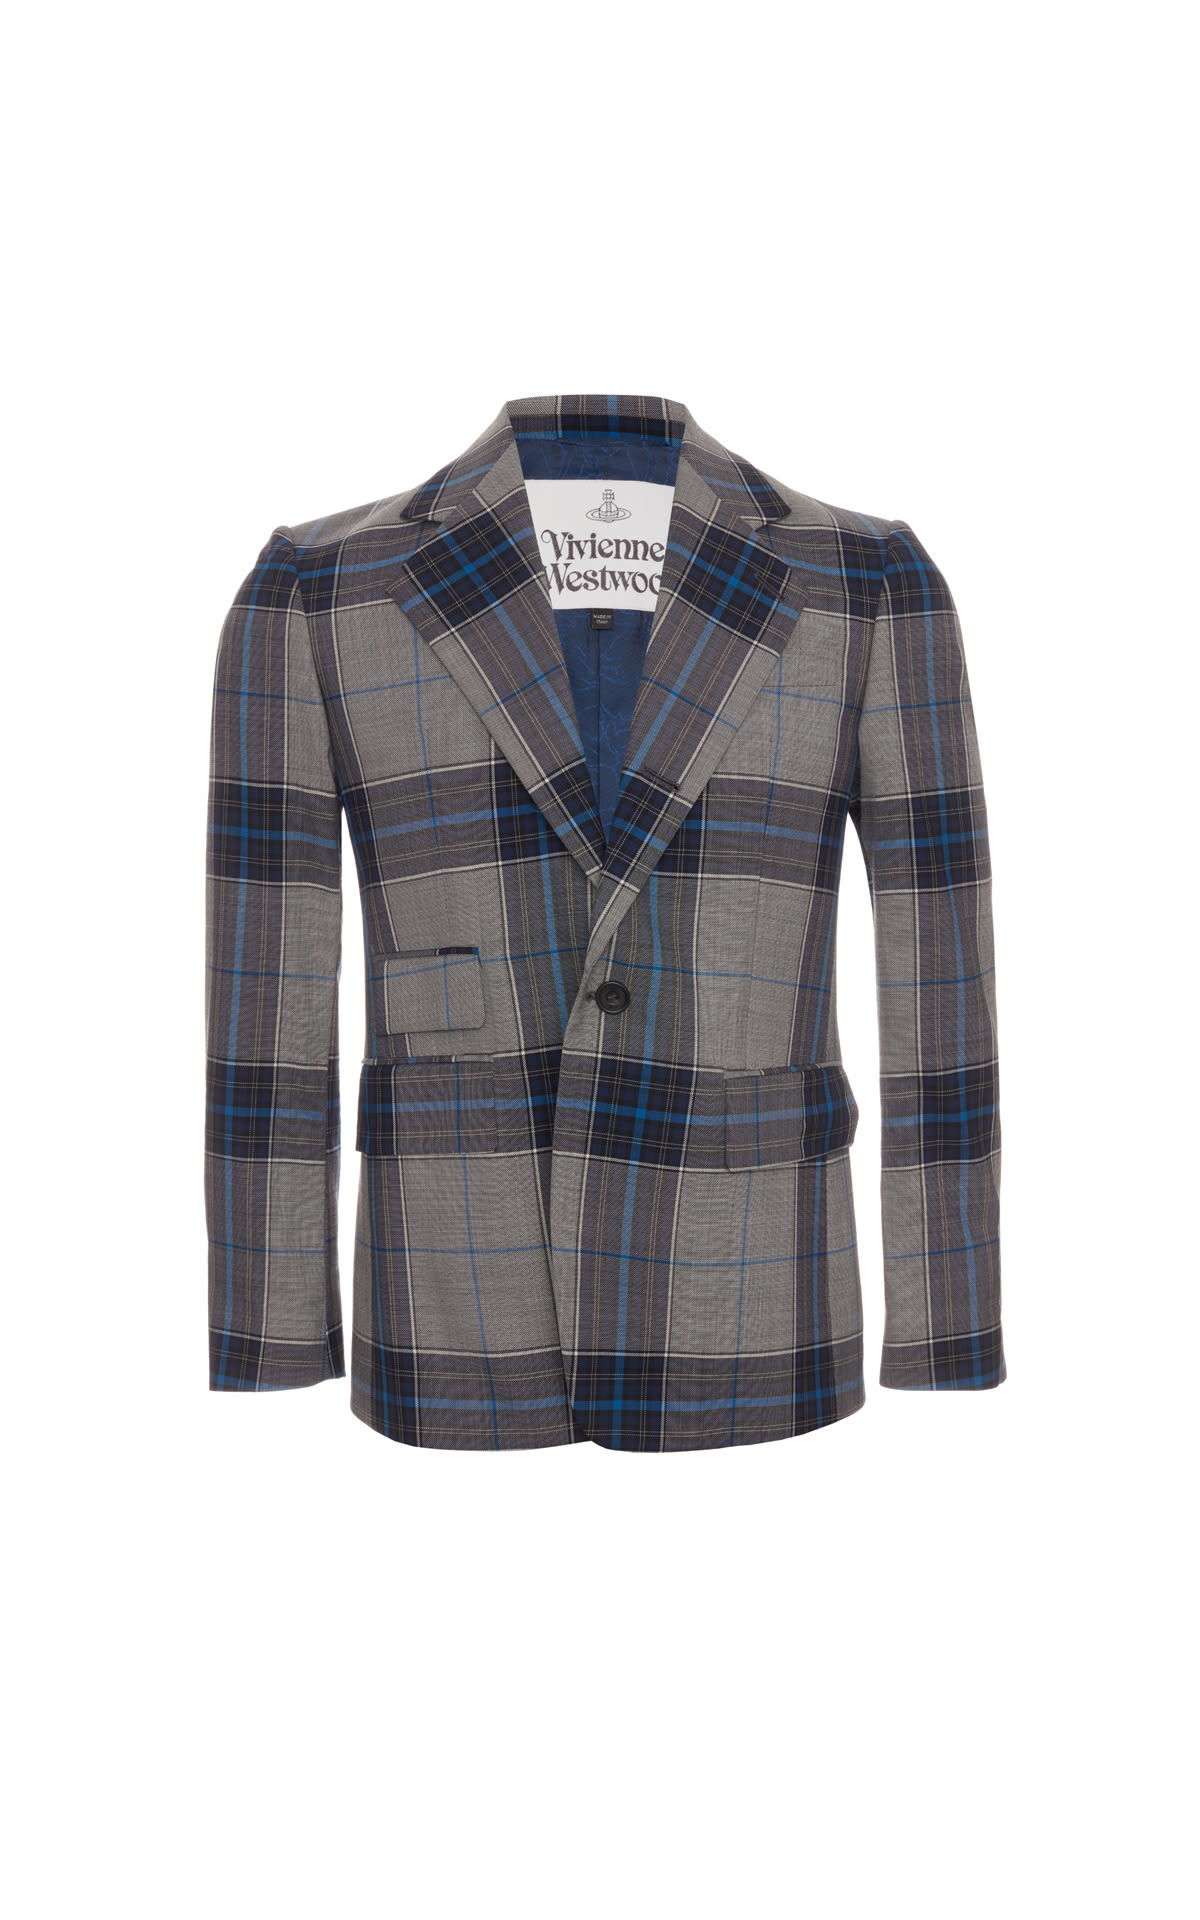 Vivienne Westwood Classic jacket blue checked from Bicester Village